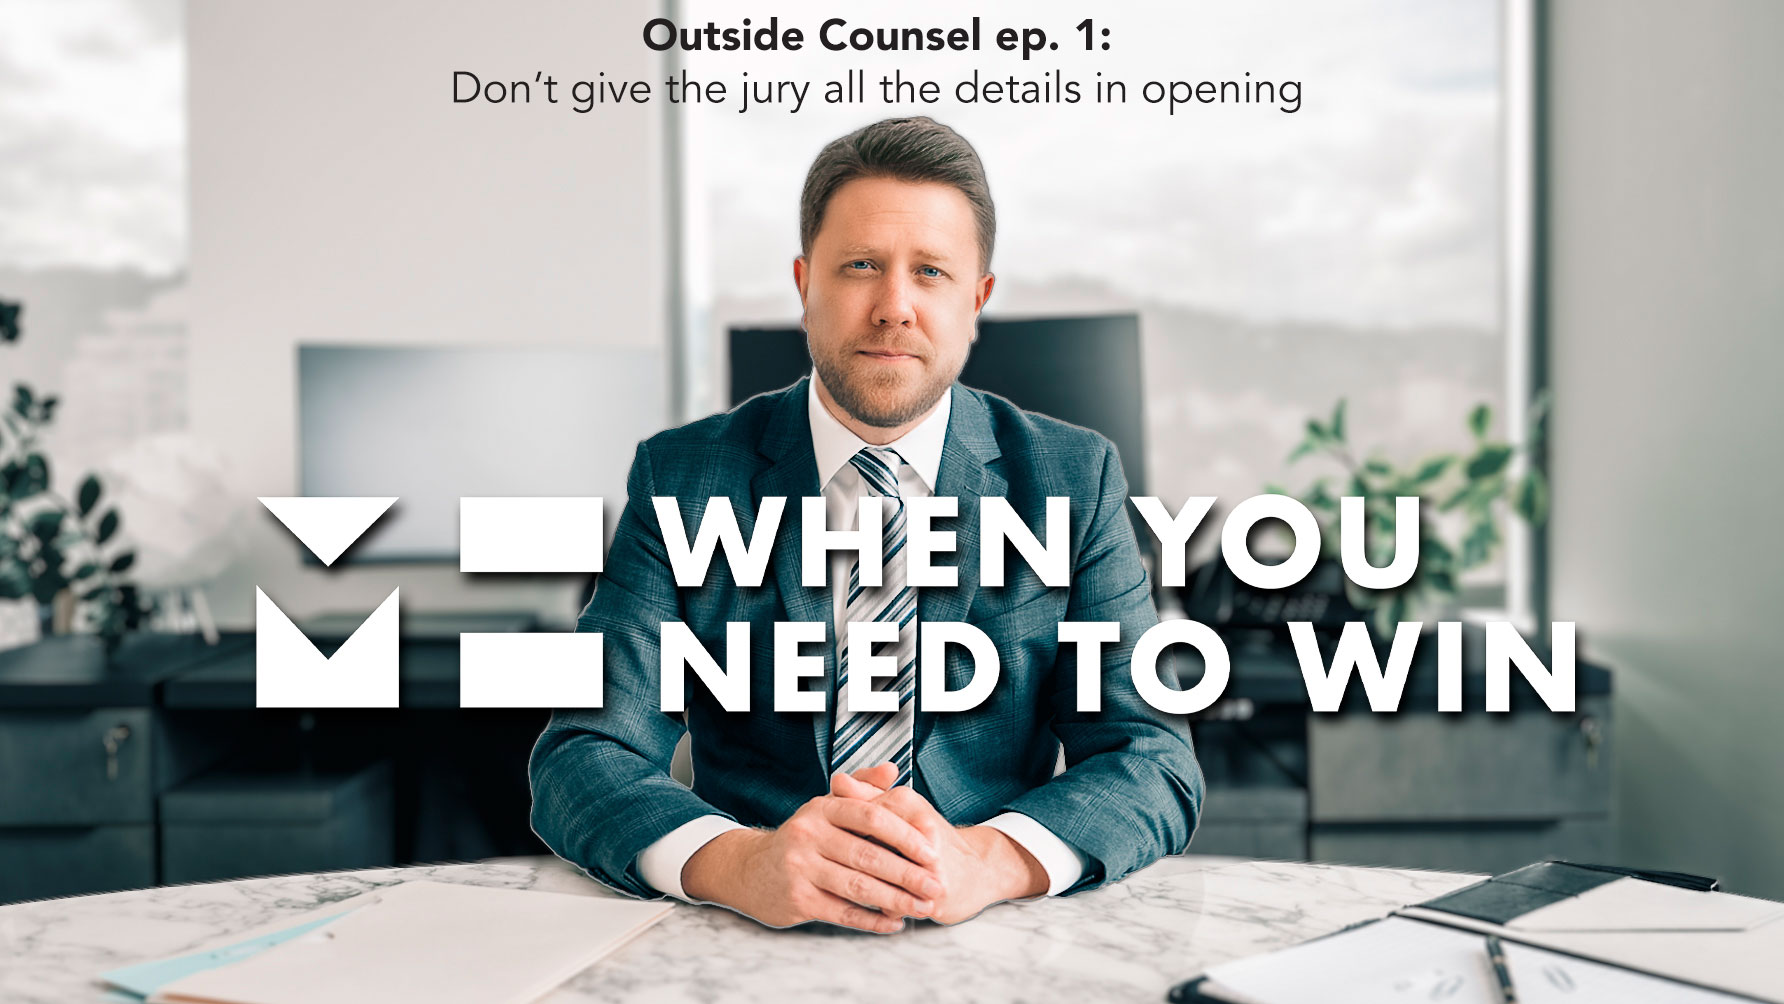 When You Need to Win - Don't give the jury all the details in opening